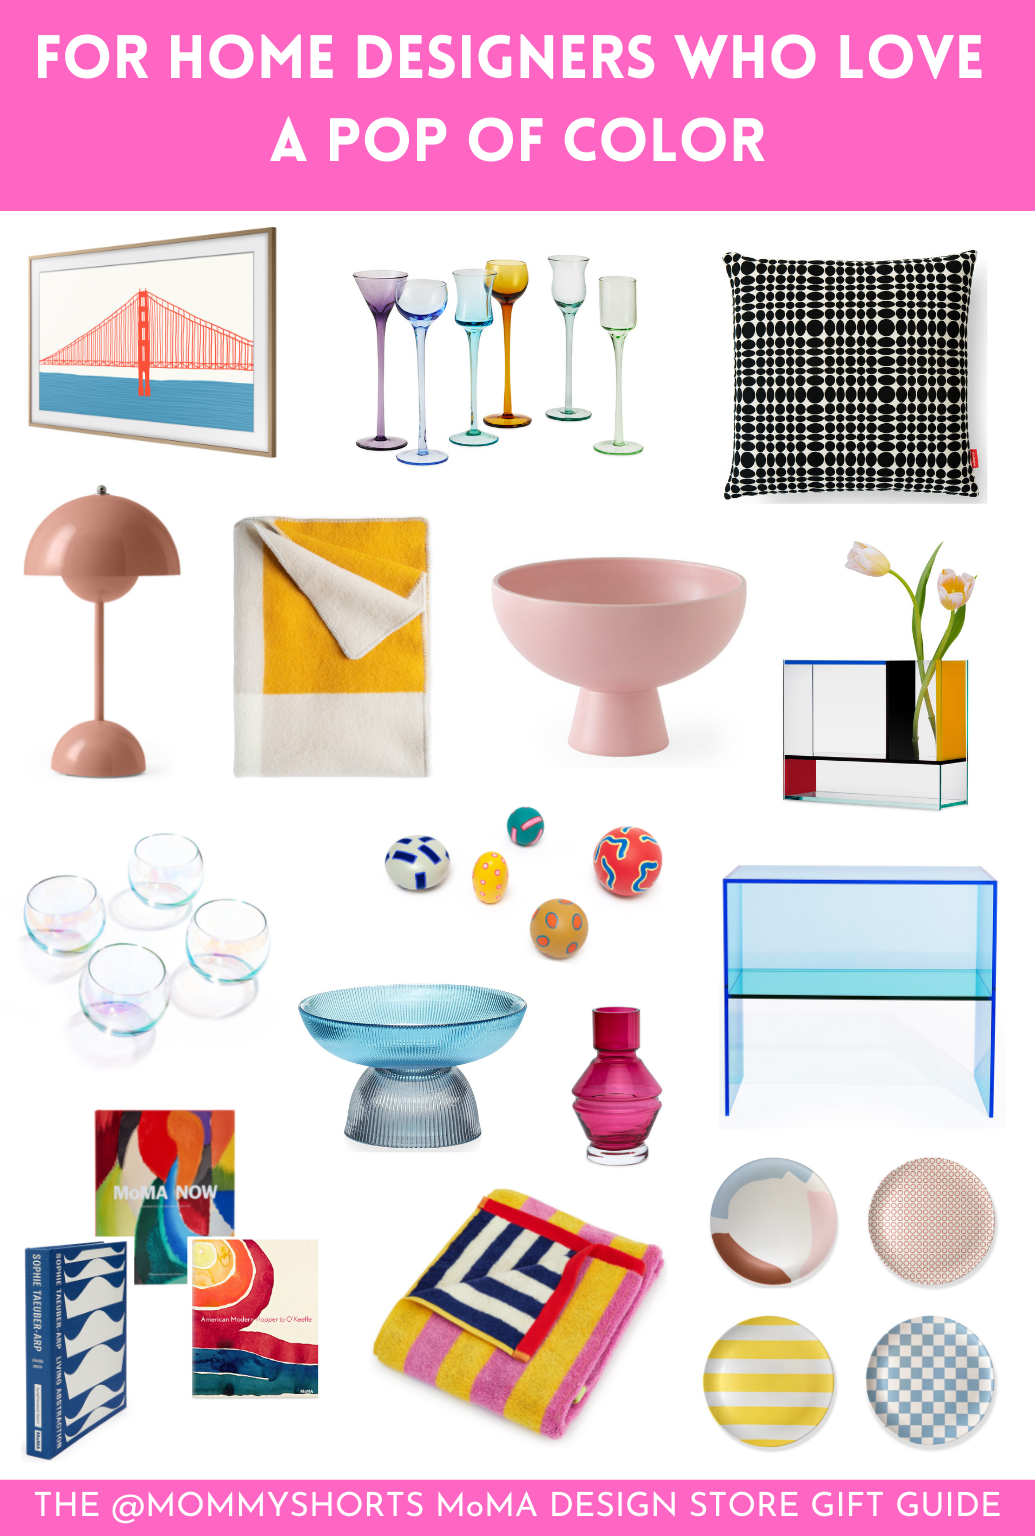 The Anti-Beige Gift Guide In Partnership with MoMA Design Store